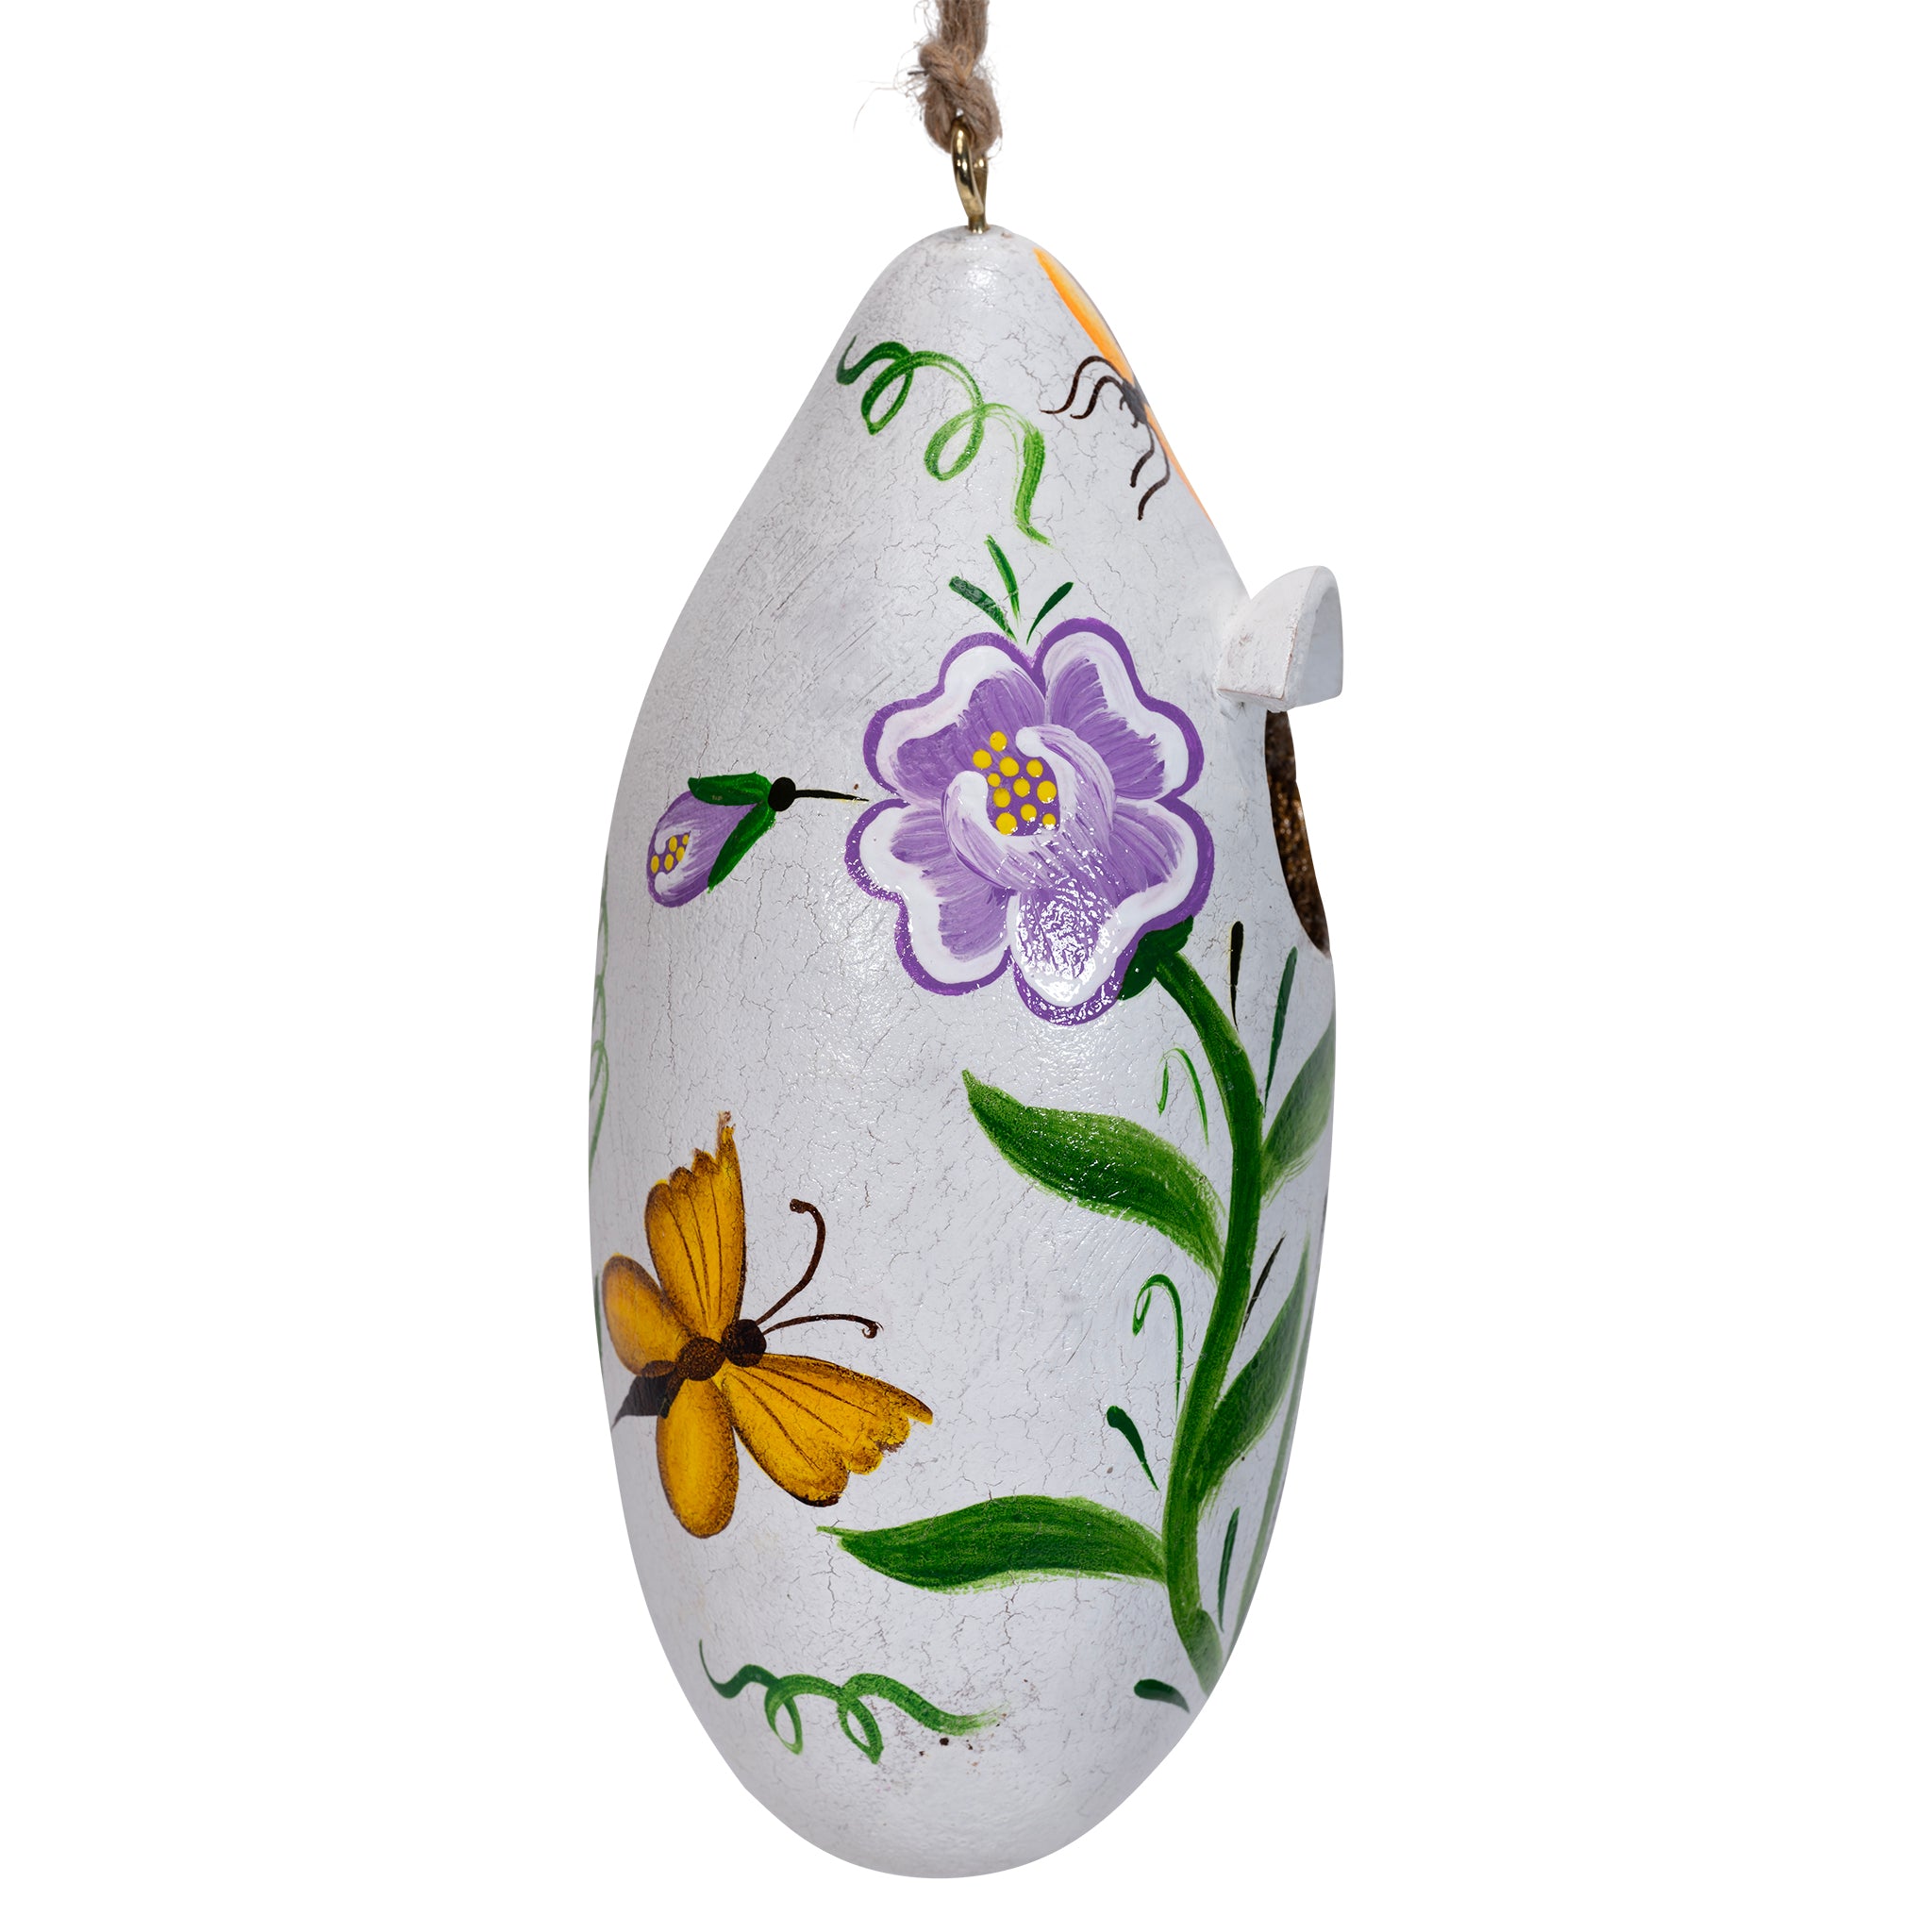 Bugs - Painted Gourd Birdhouse